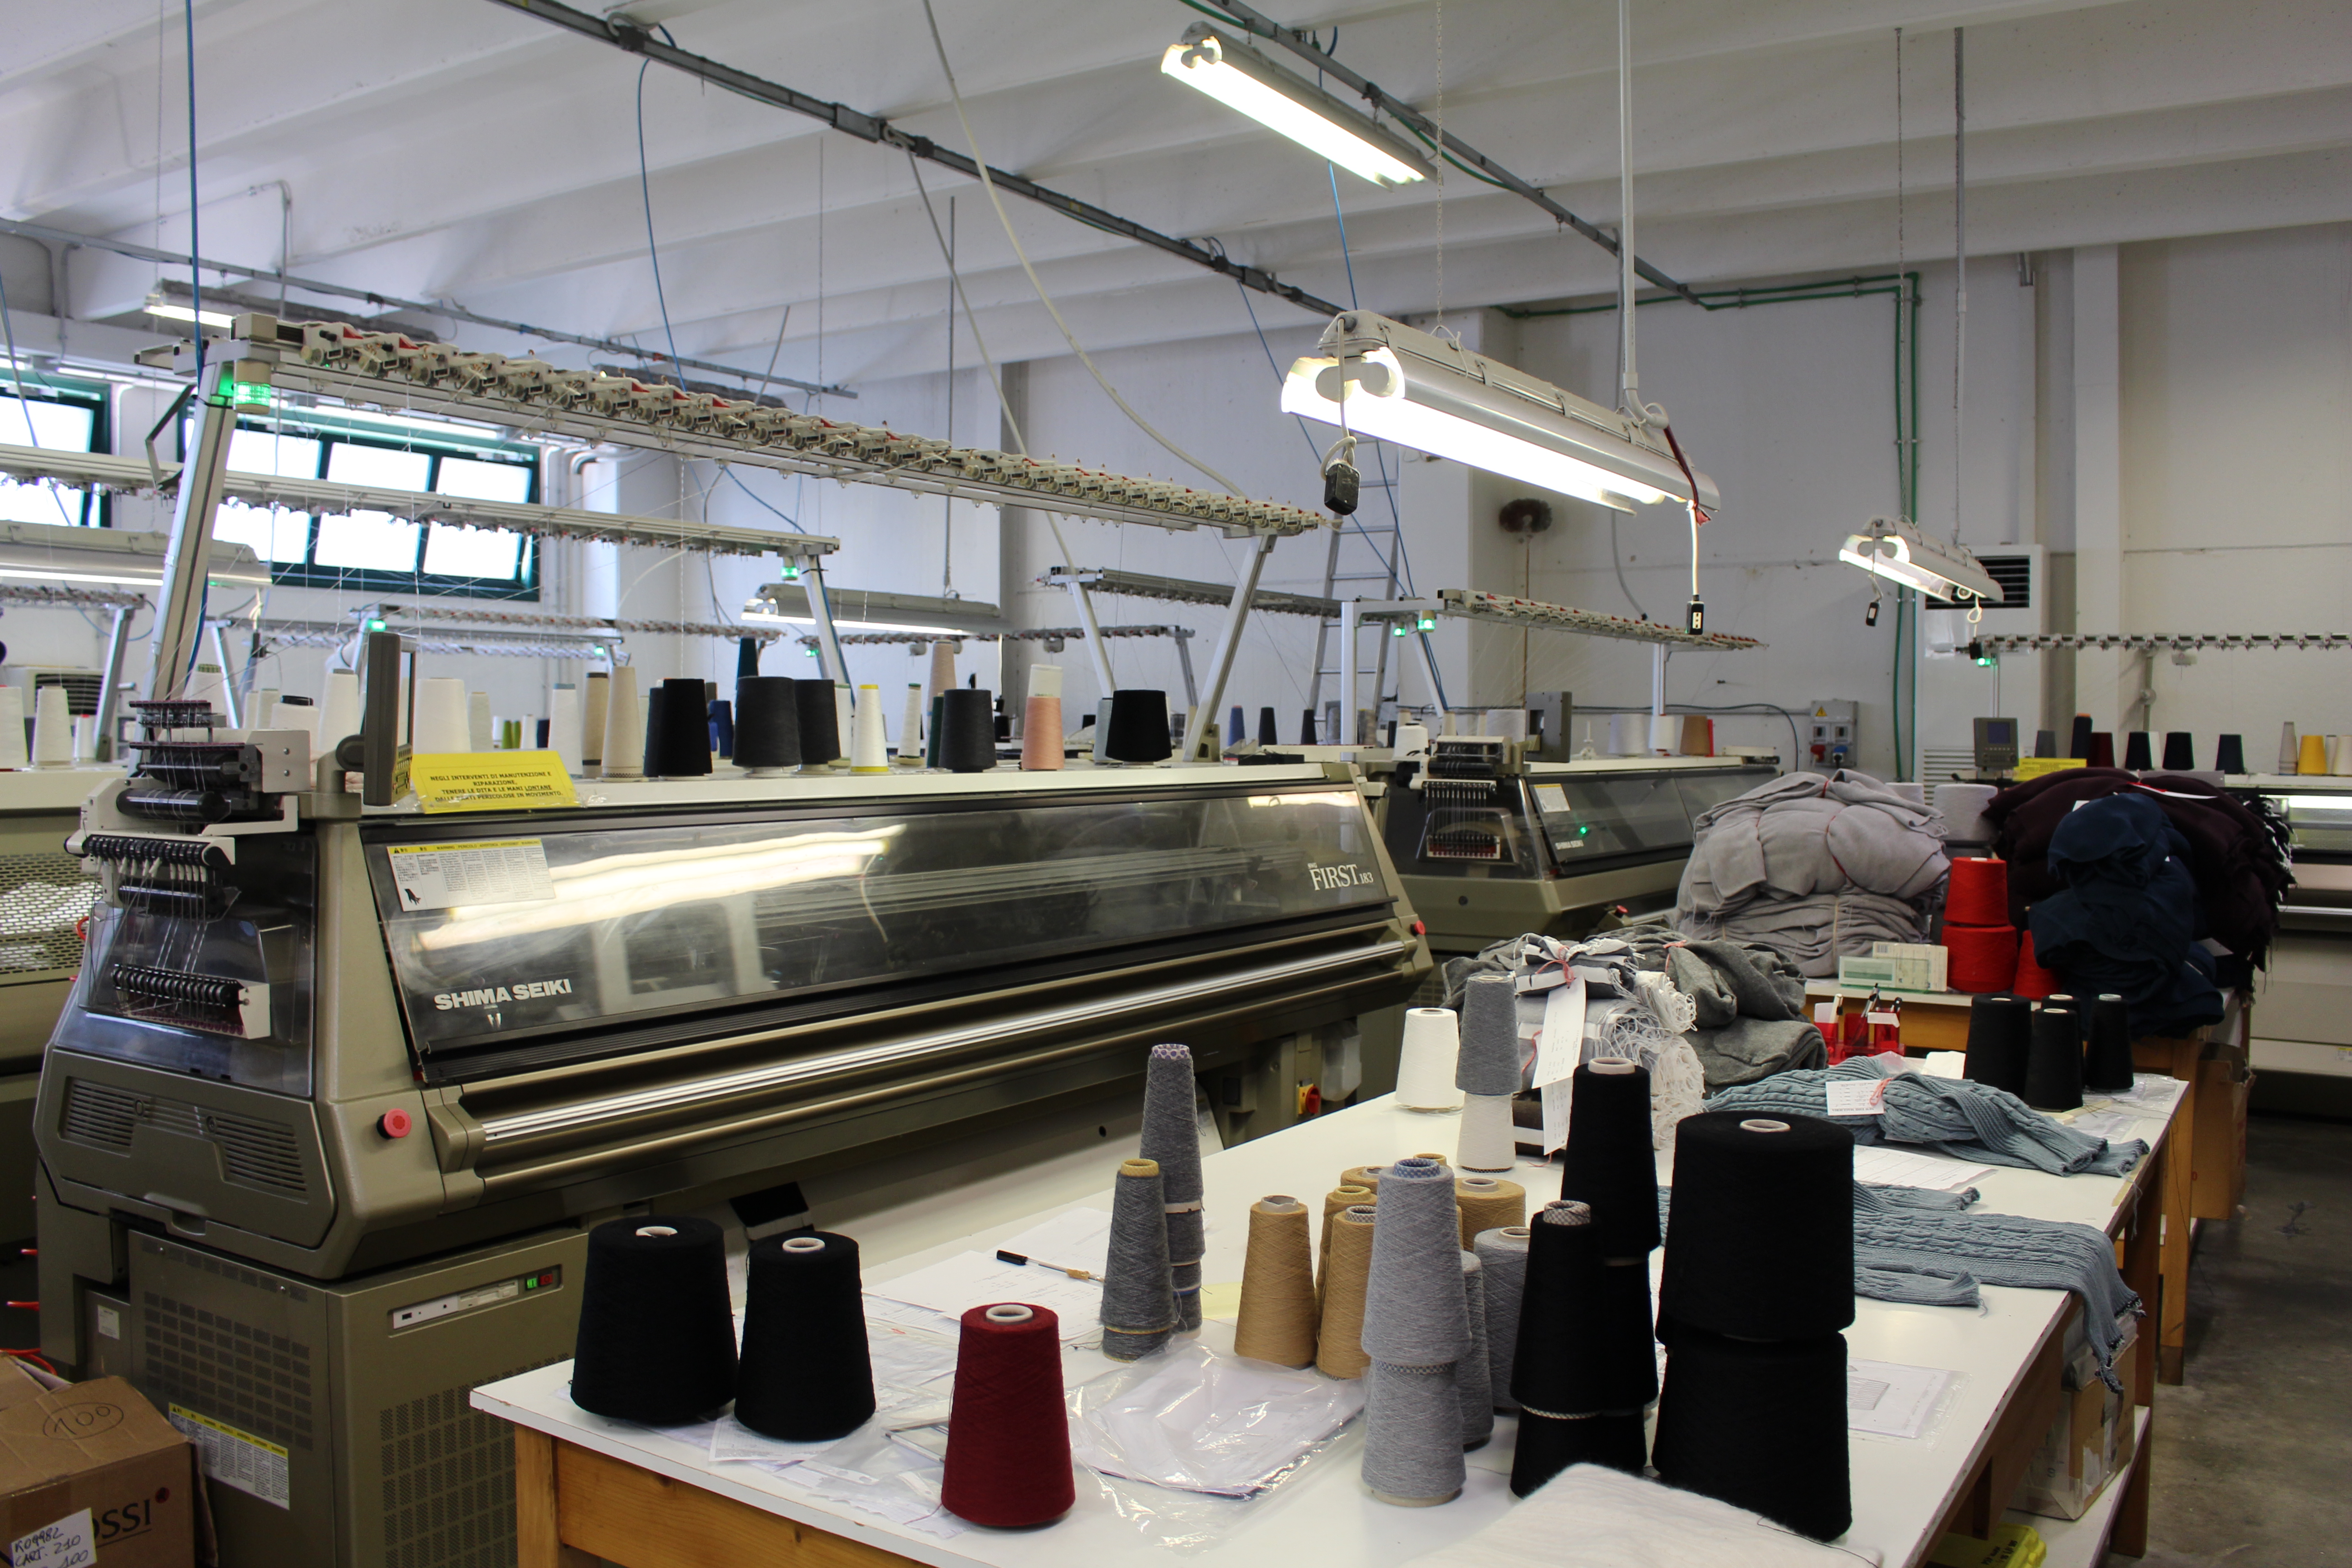 NSM’s knitting room is absolutely full with Shima Seiki WHOLEGARMENT knitting machines. The company is planning further expansion and will move to a larger factory.